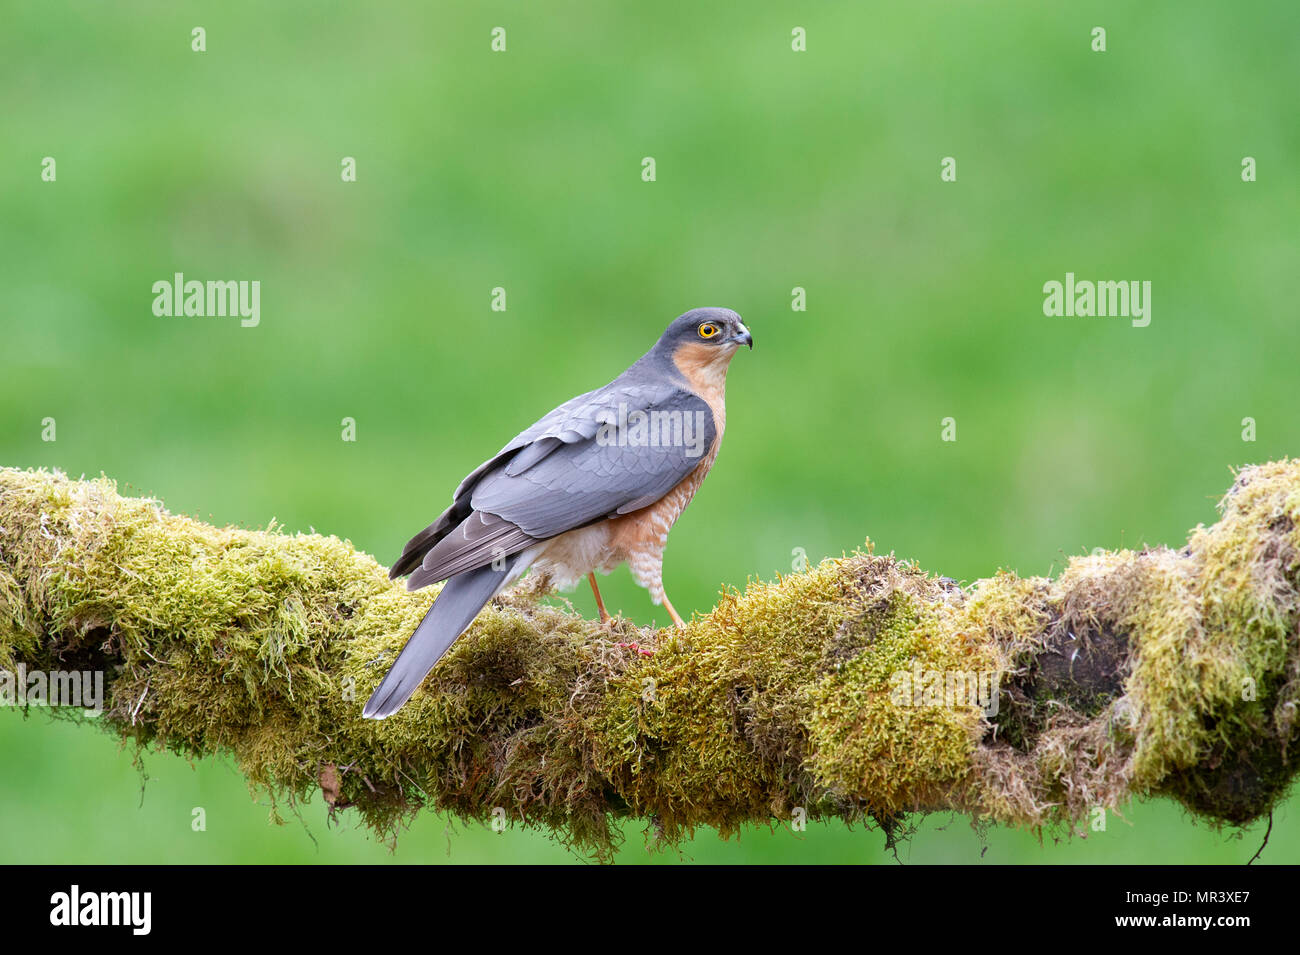 A male Sparrowhawk (Accipiter nisus) perched on a moss covered branch in British woodland. Stock Photo